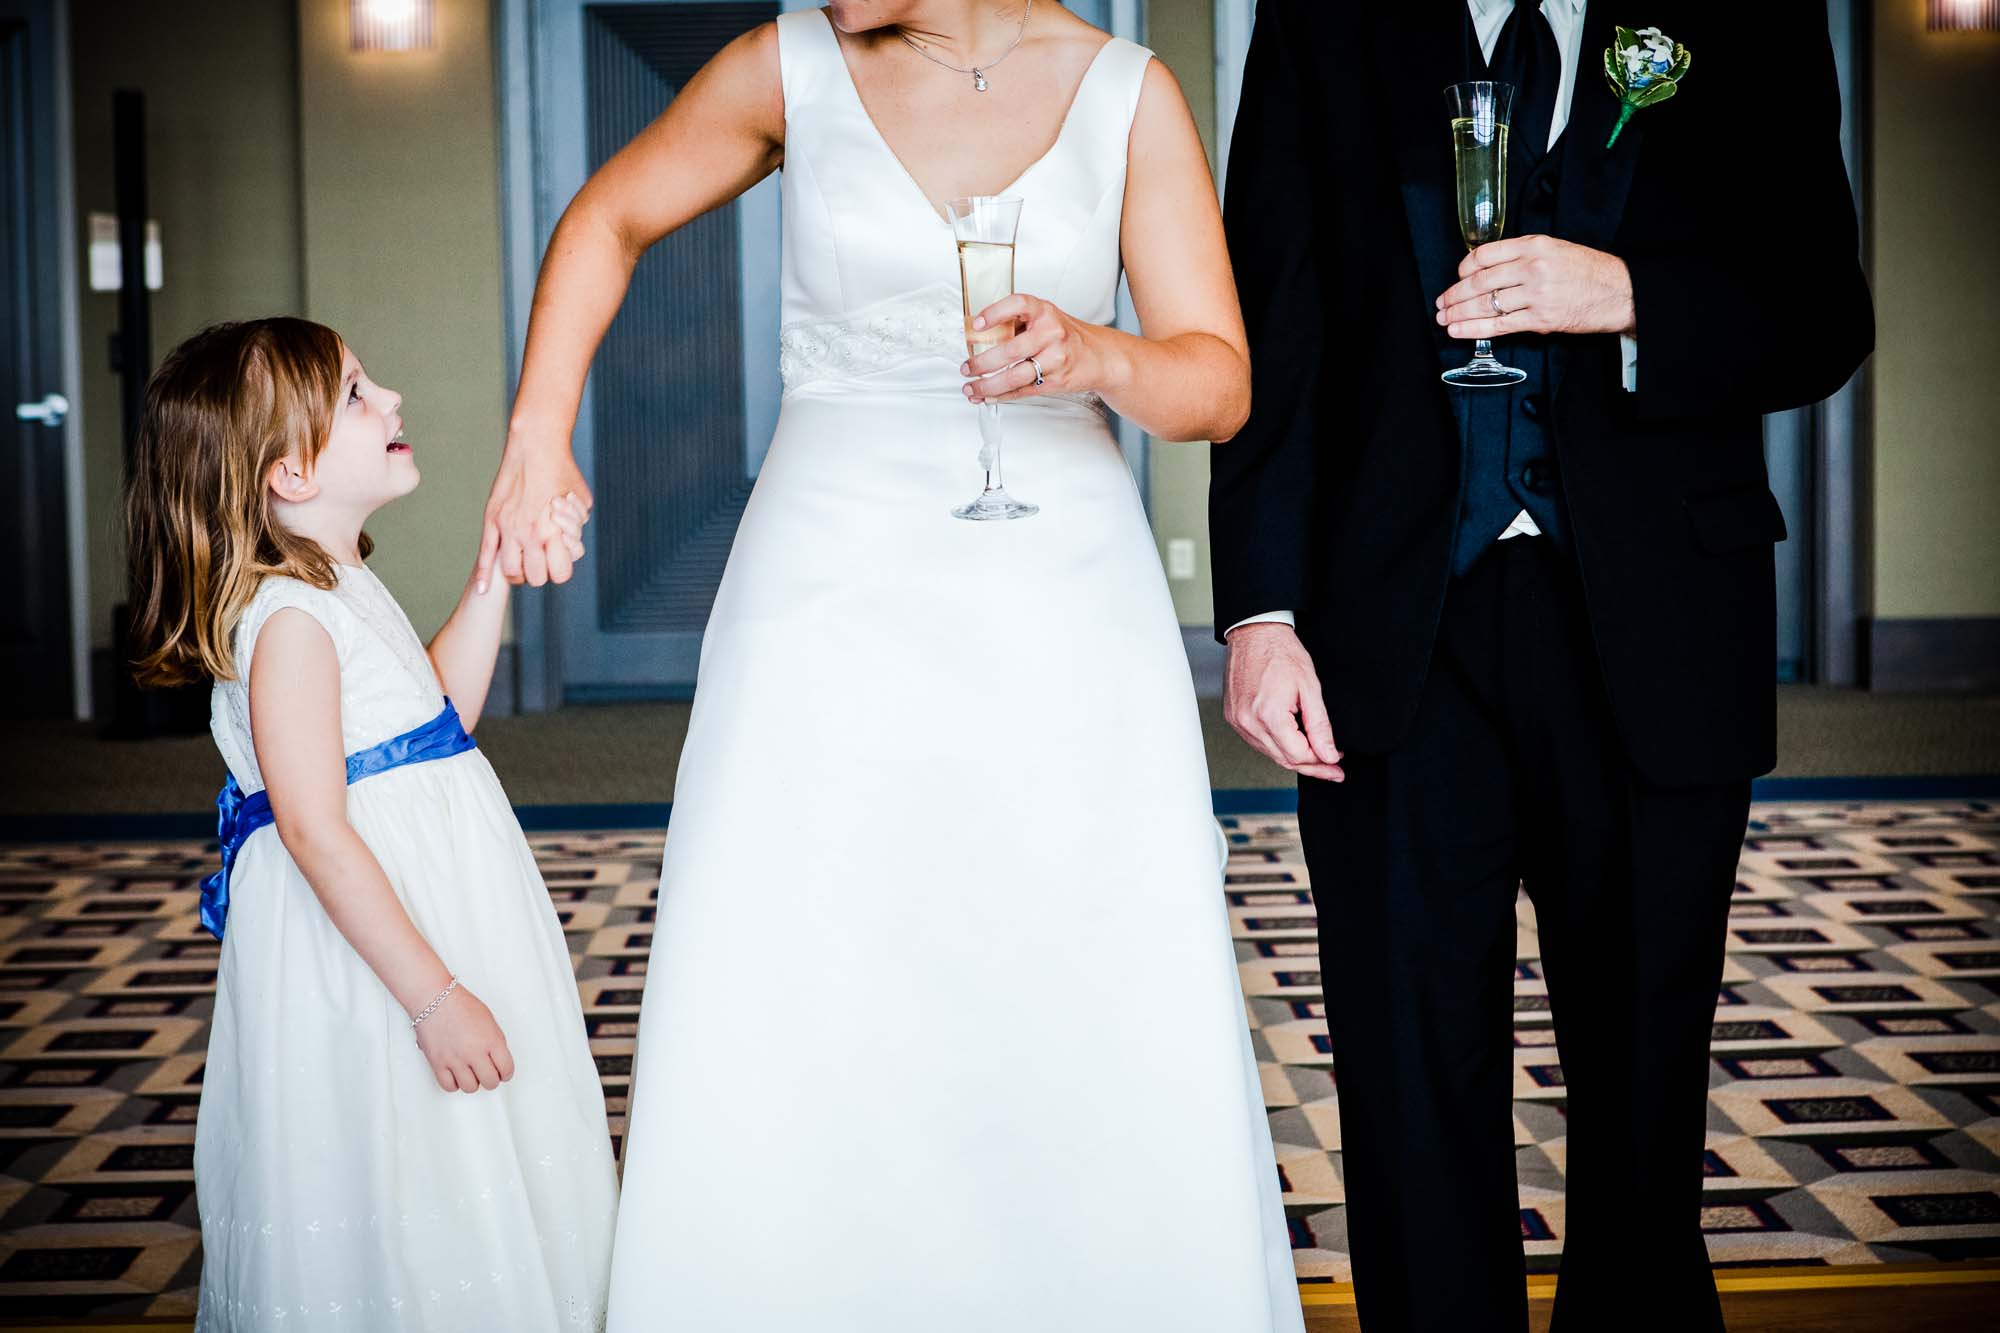 little girl in flower girl dress smiles up at the bride and groom and holds the bride's hand as they are holding champagne glasses in a reception room